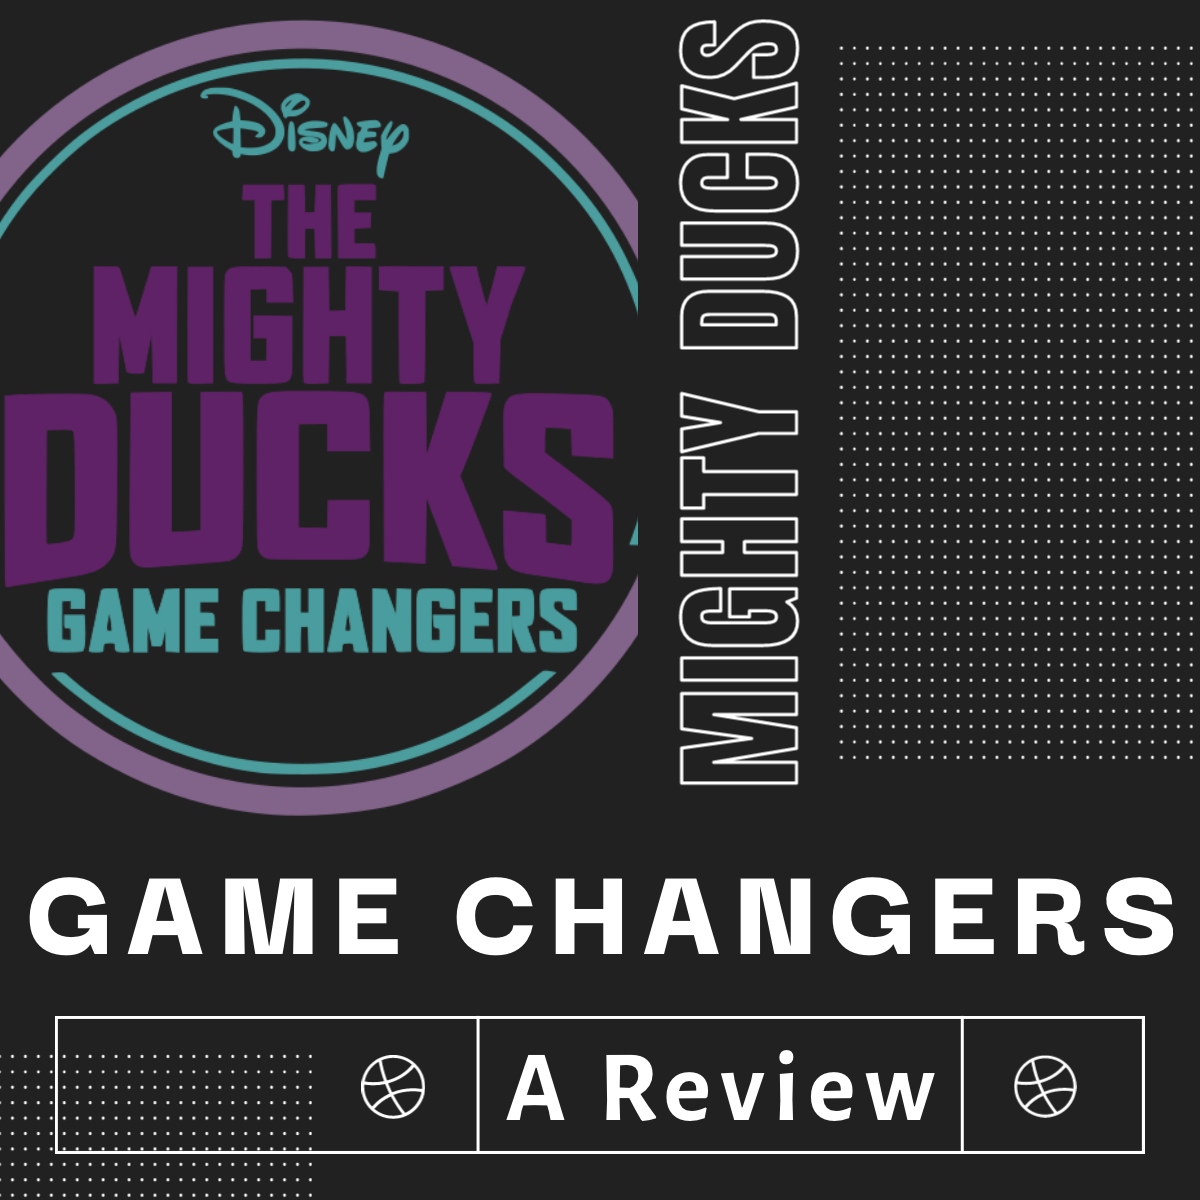 What was the Disney show The Mighty Ducks: Game Changers all about and why  was it cancelled?